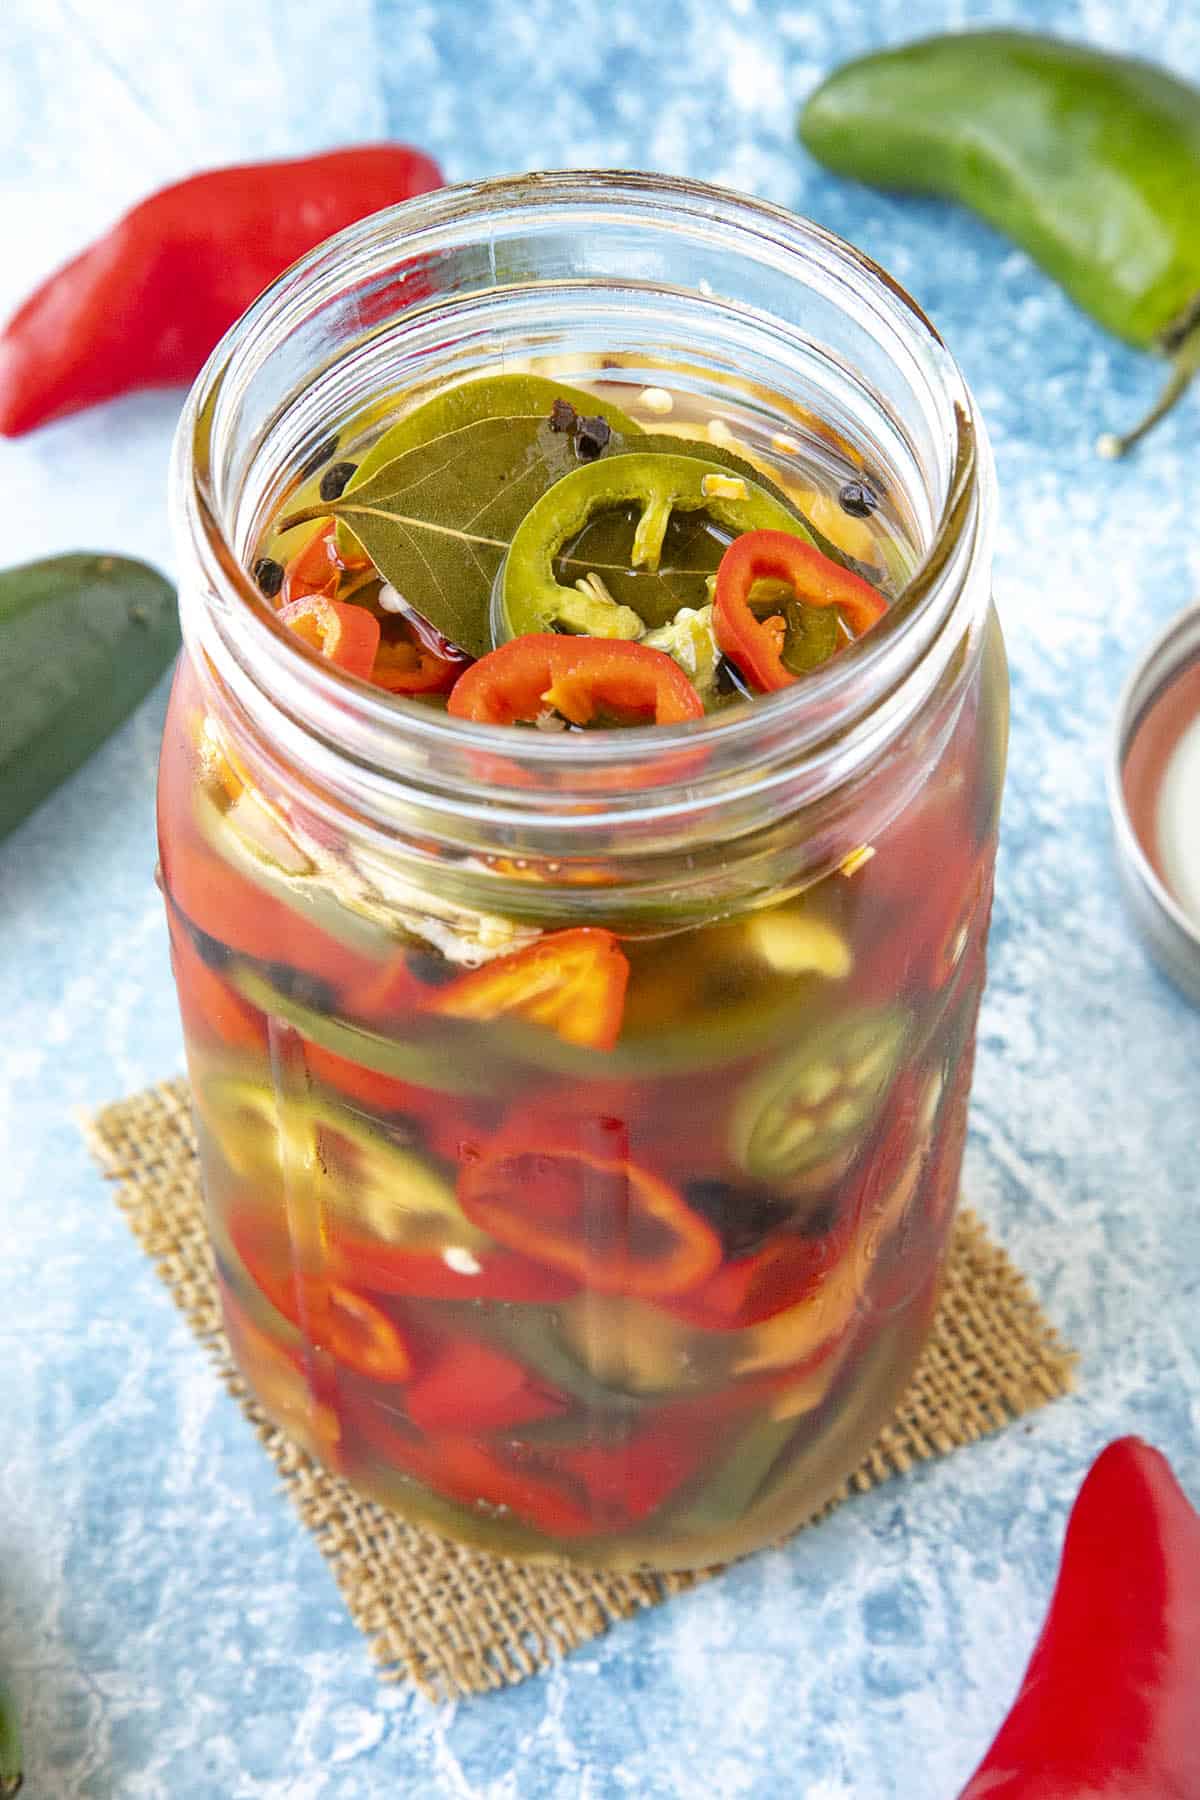 A mix of Pickled peppers in a jar